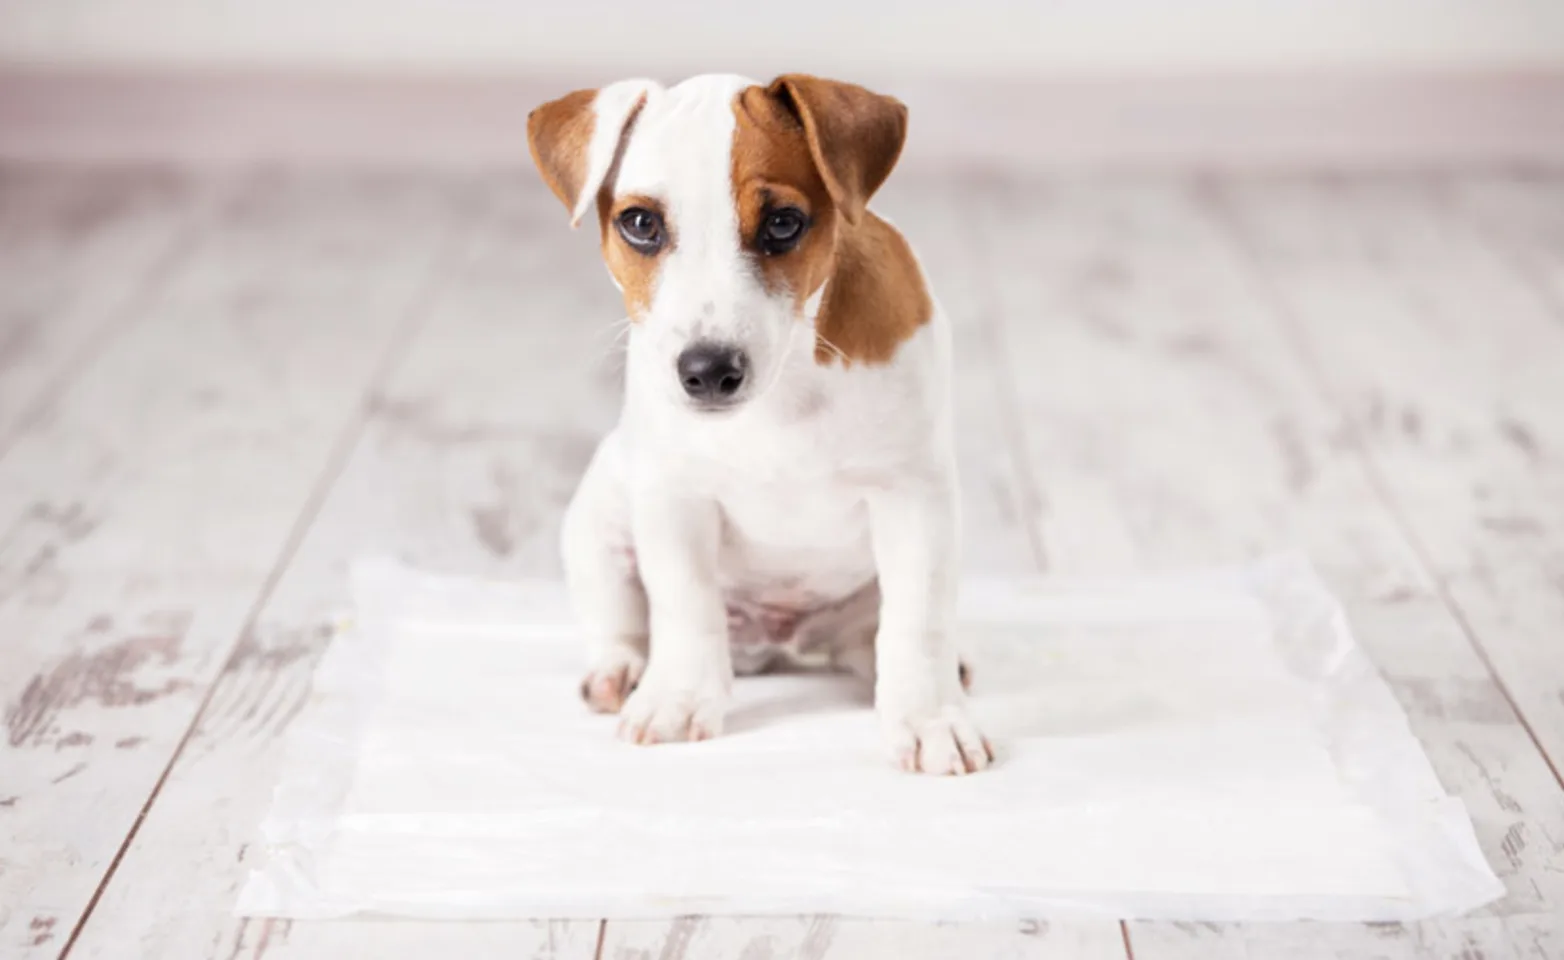 Puppy sits on a potty training pad